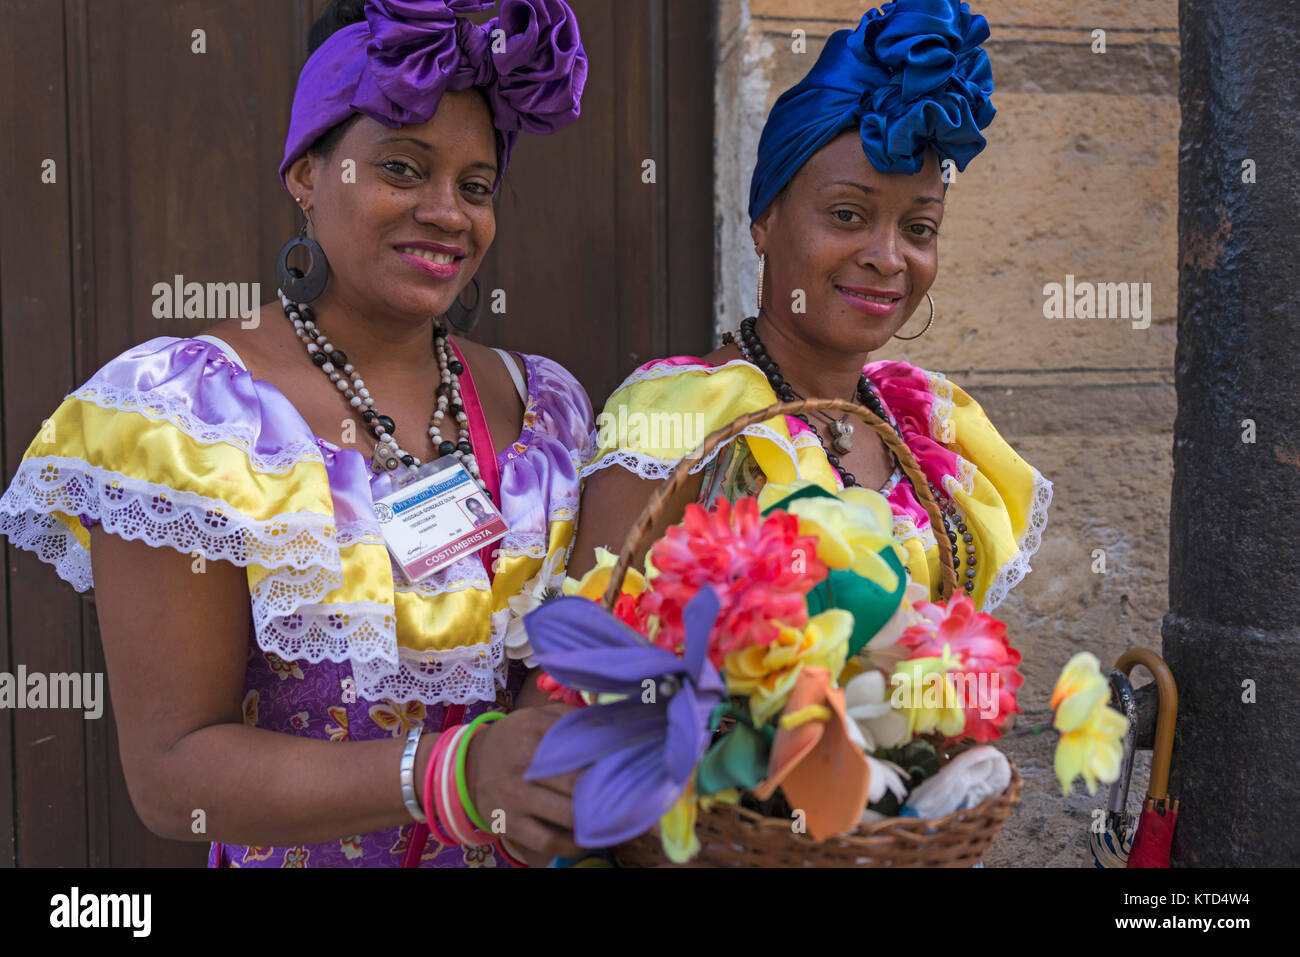 Two women dressed in traditional costumes in the streets of Havana, Cuba Stock Photo